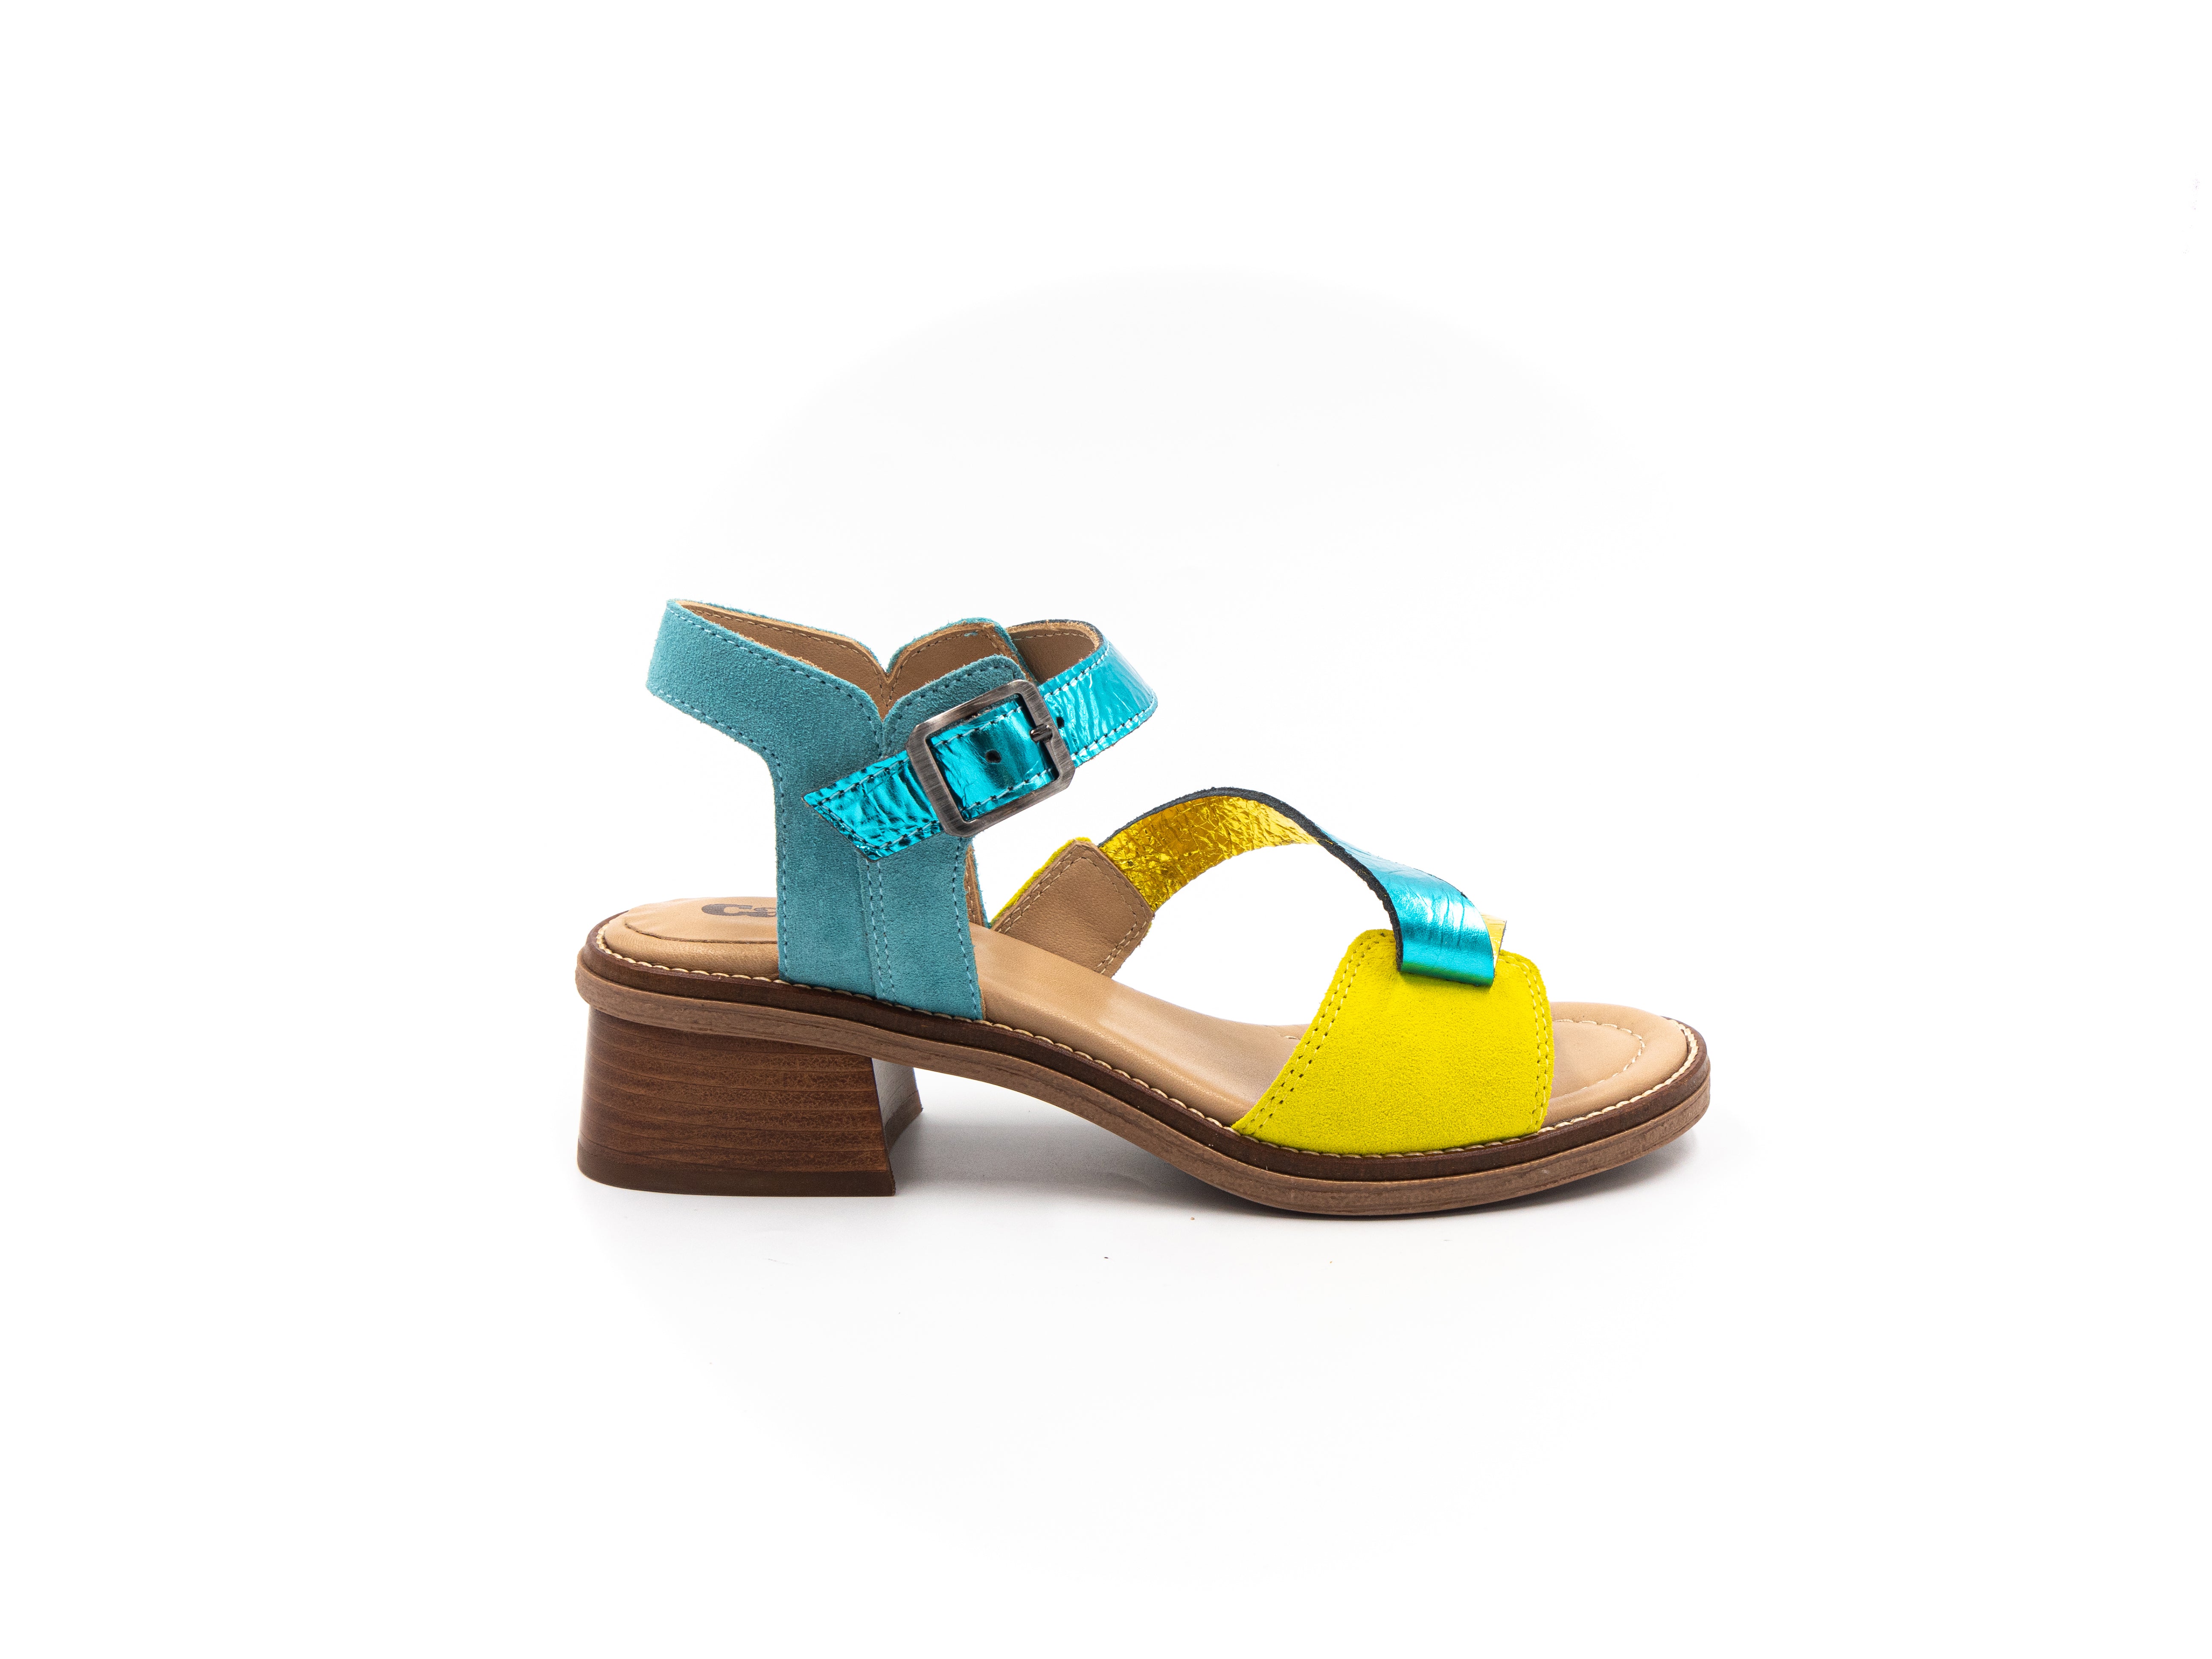 Sandals with small heels in yellow and turquoise.